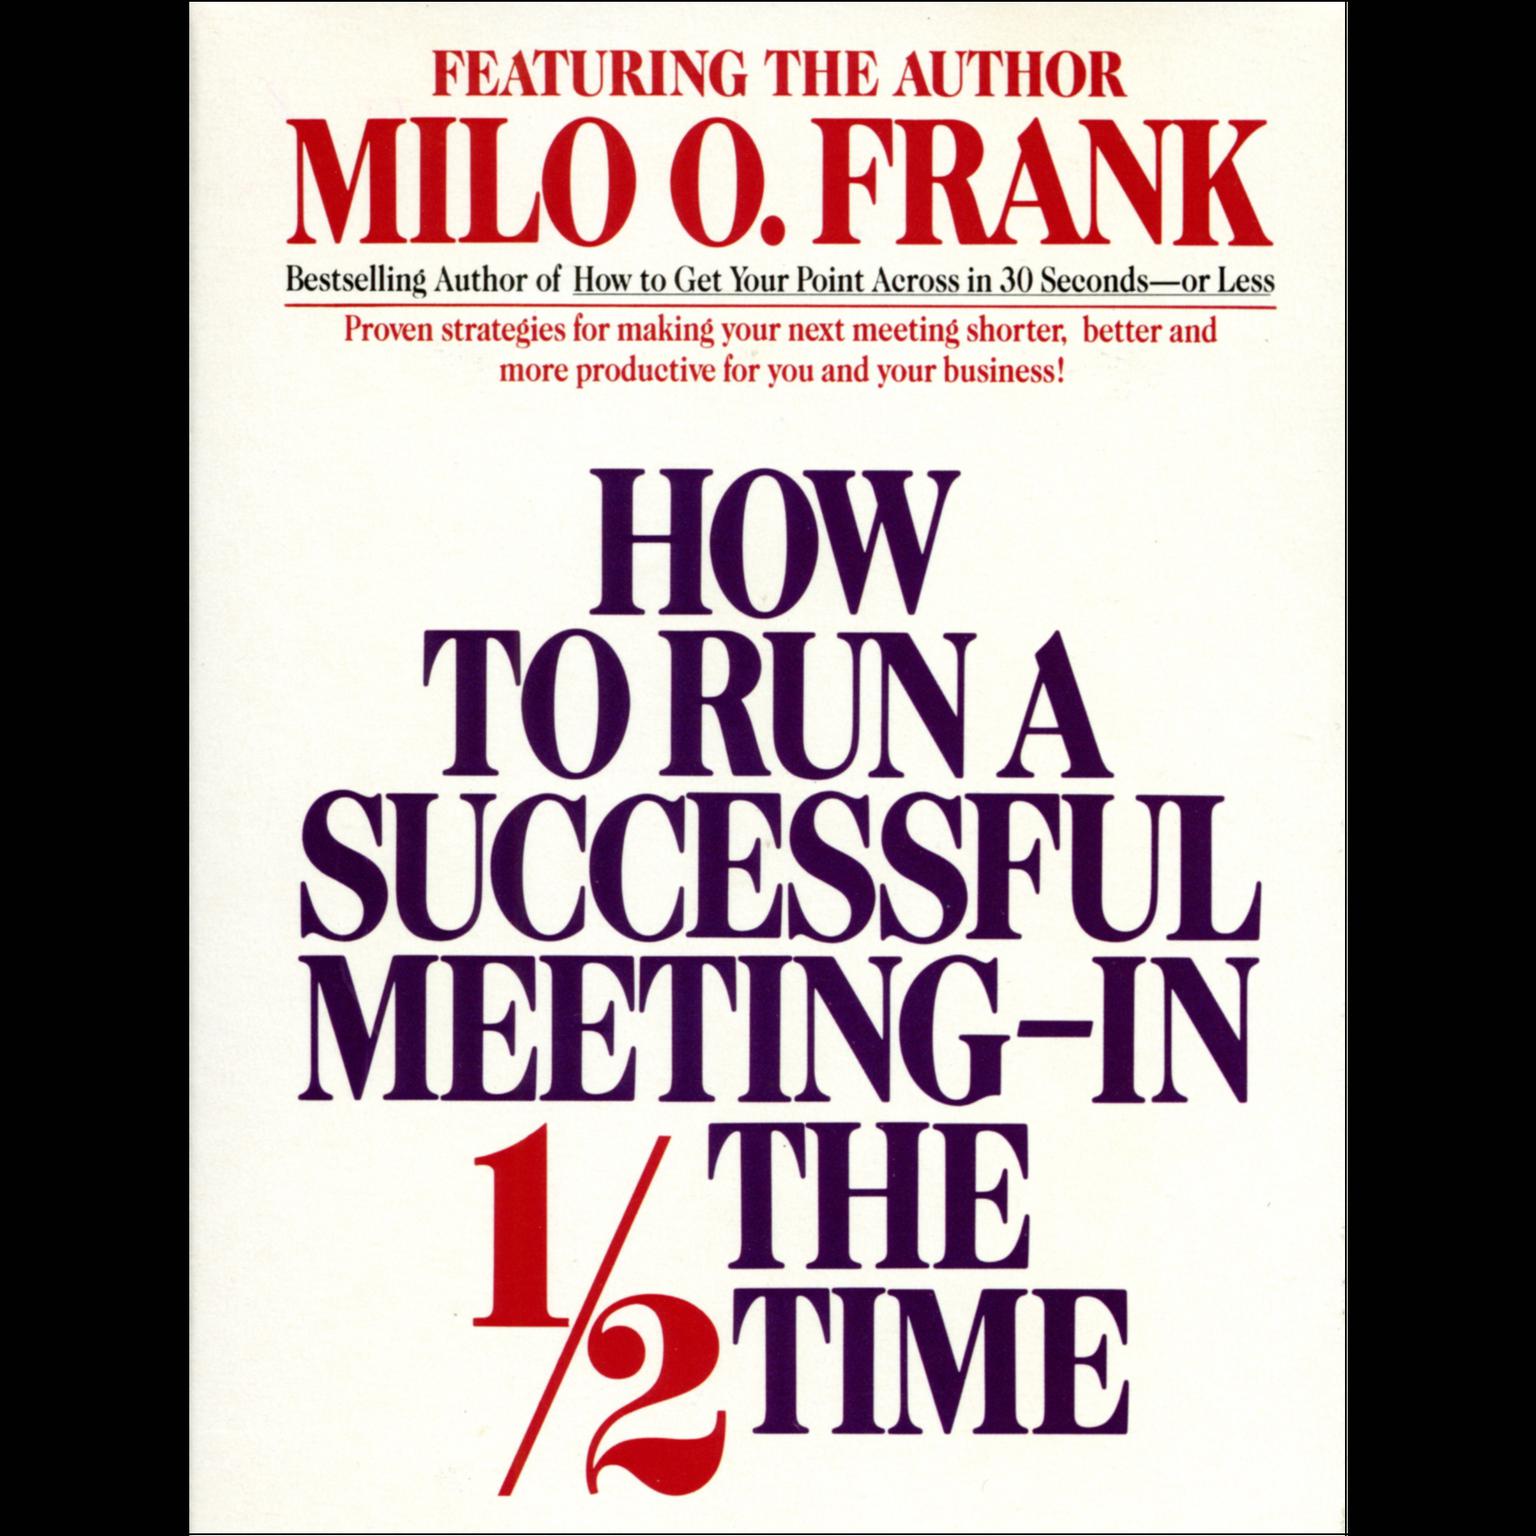 How to Run A Successful Meeting In ½ the Time (Abridged) Audiobook, by Milo O. Frank